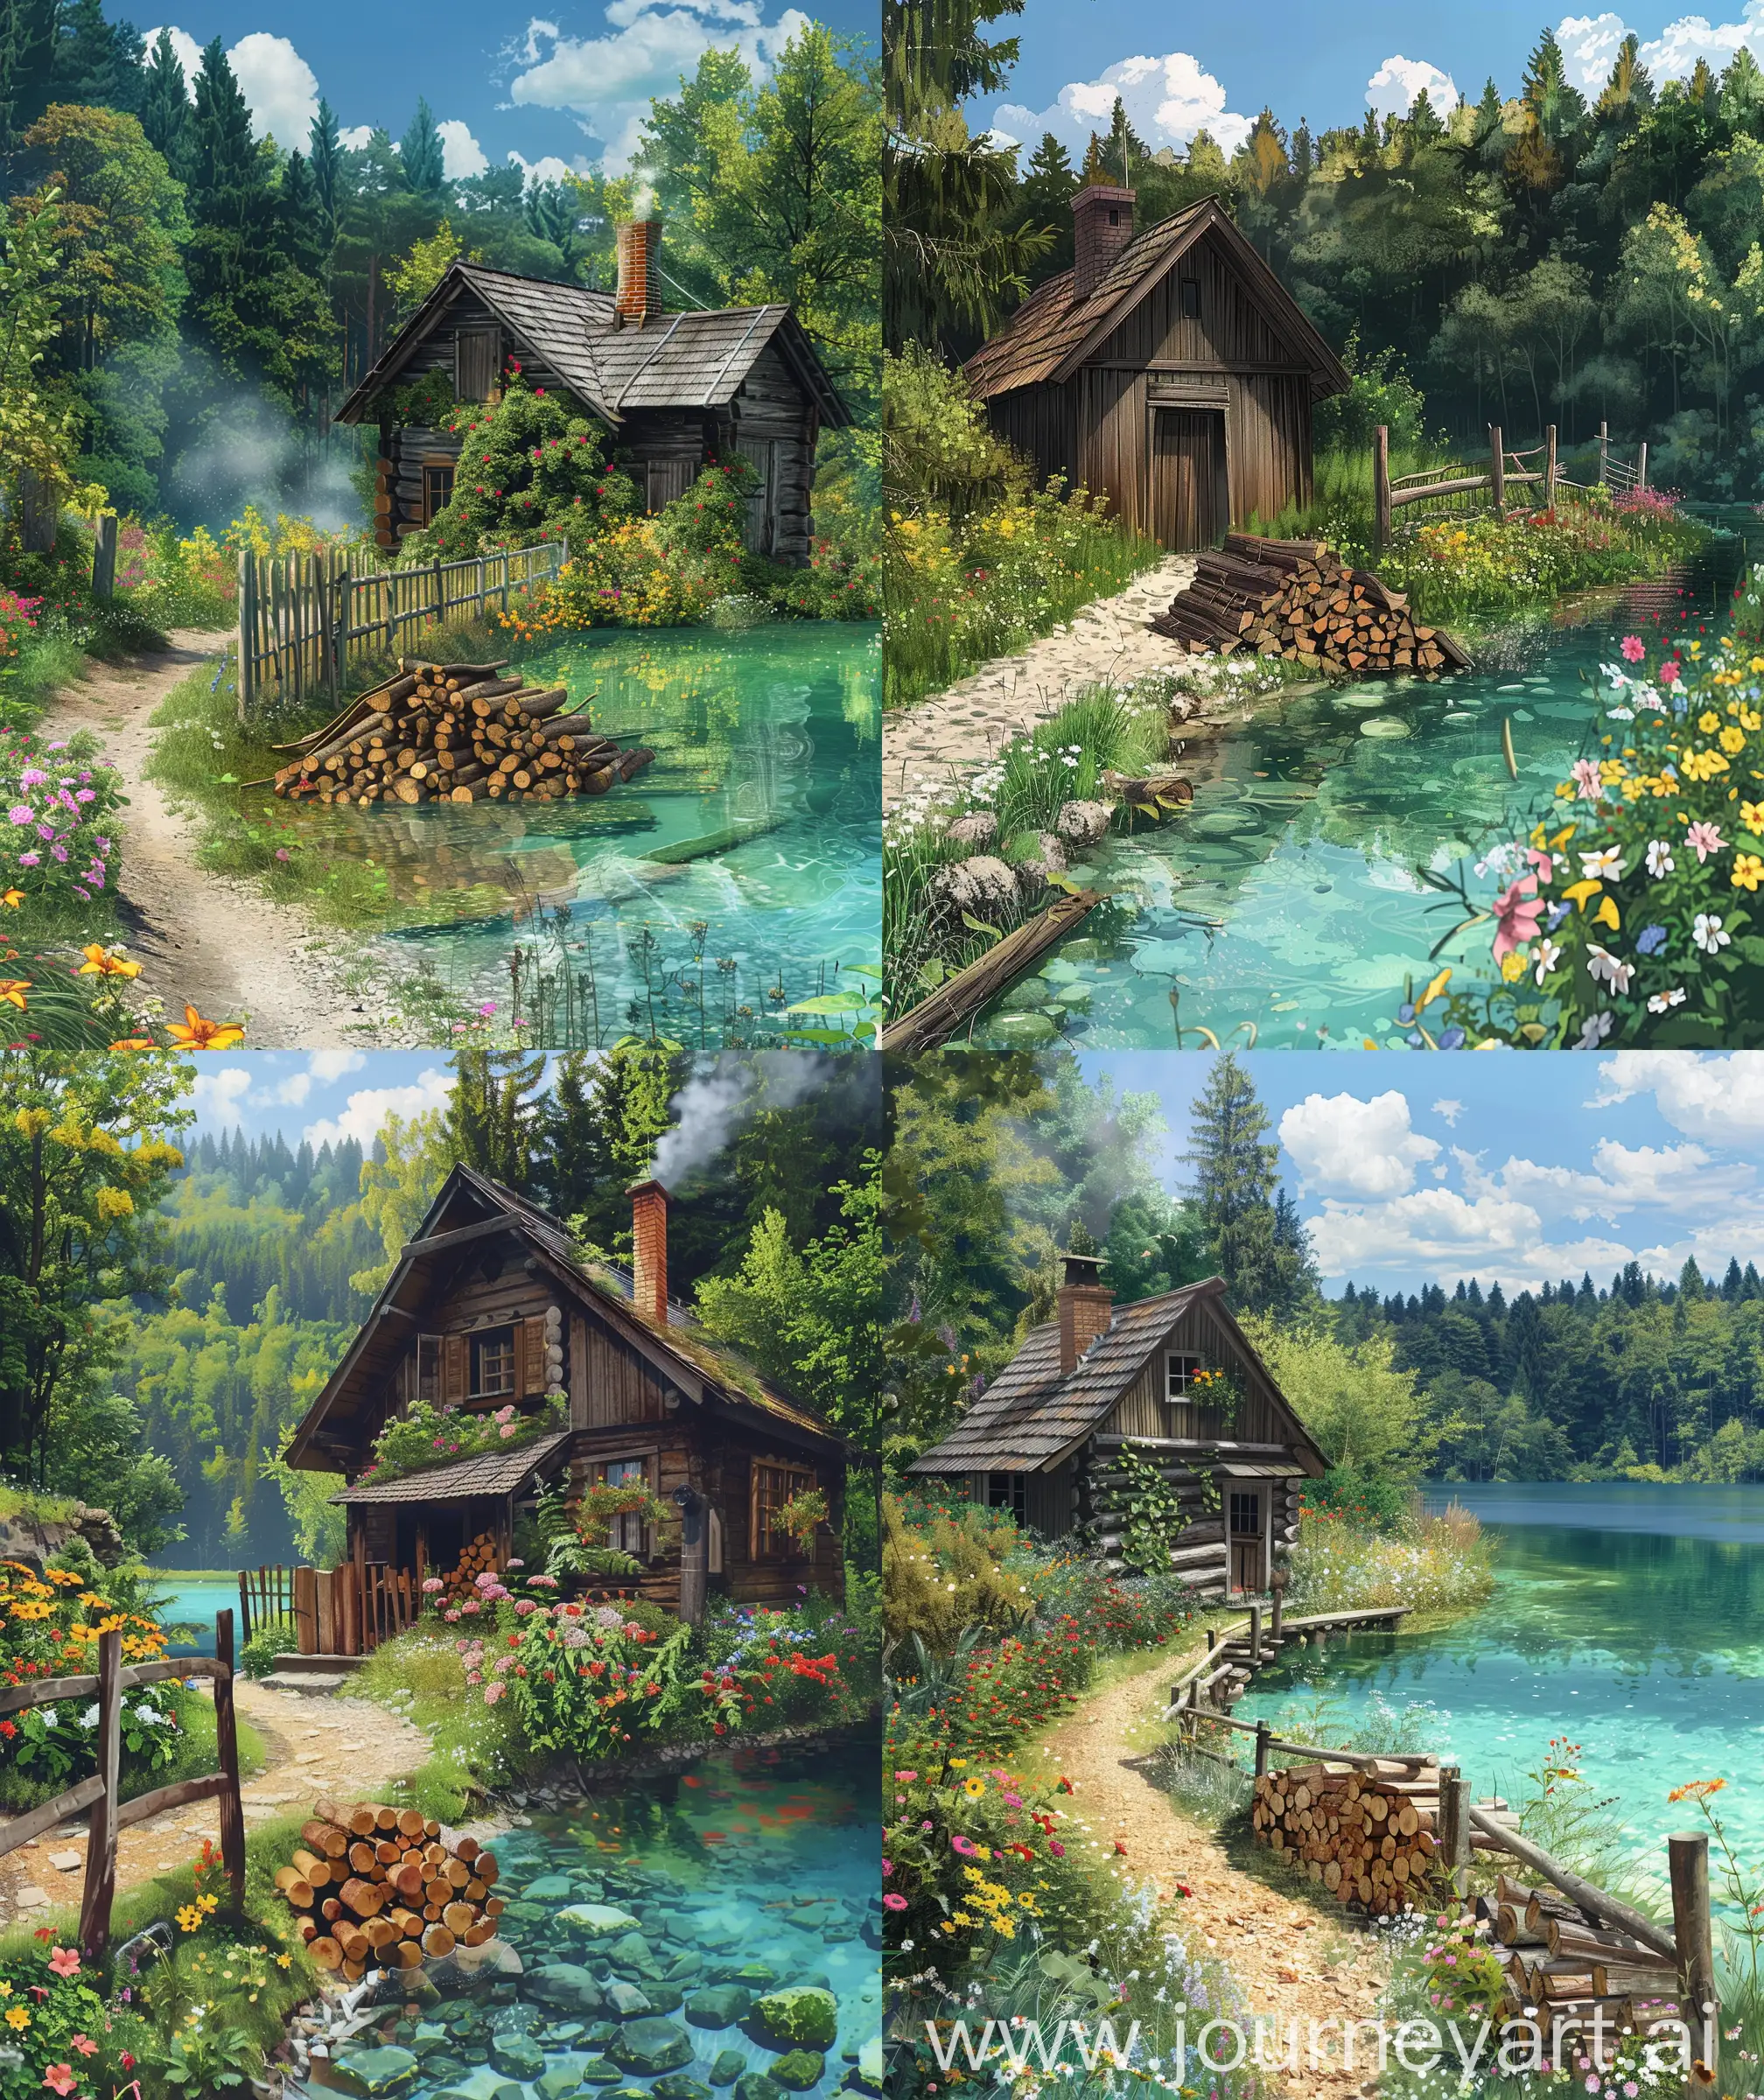 Anime scenary, day time, illustration, Białowieża forest , direct front decade view of small wooden cottage, wood pile beside cottage, wooden fence, chimney, flowers, beautiful colorfull flowers , view, path,  Cristal clear water, beautiful anime look, beautiful anime scenary, High quality, HD, illustration, no blurry image, no hyperrealistic --ar 27:32 